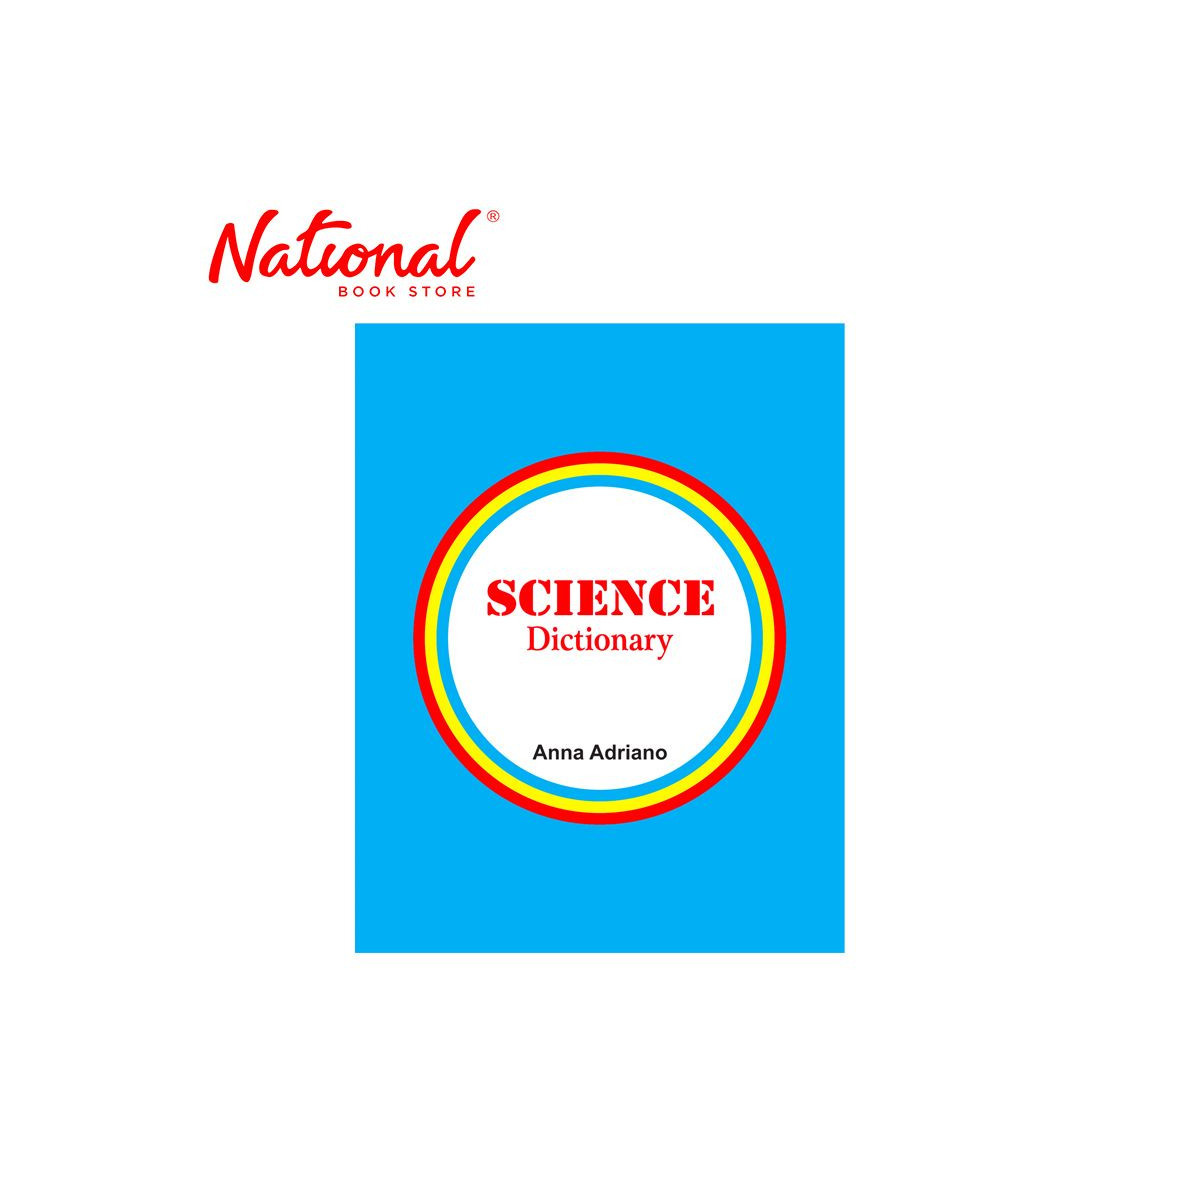 Science Dictionary Trade Paperback by Anna Adriano - Reference Books